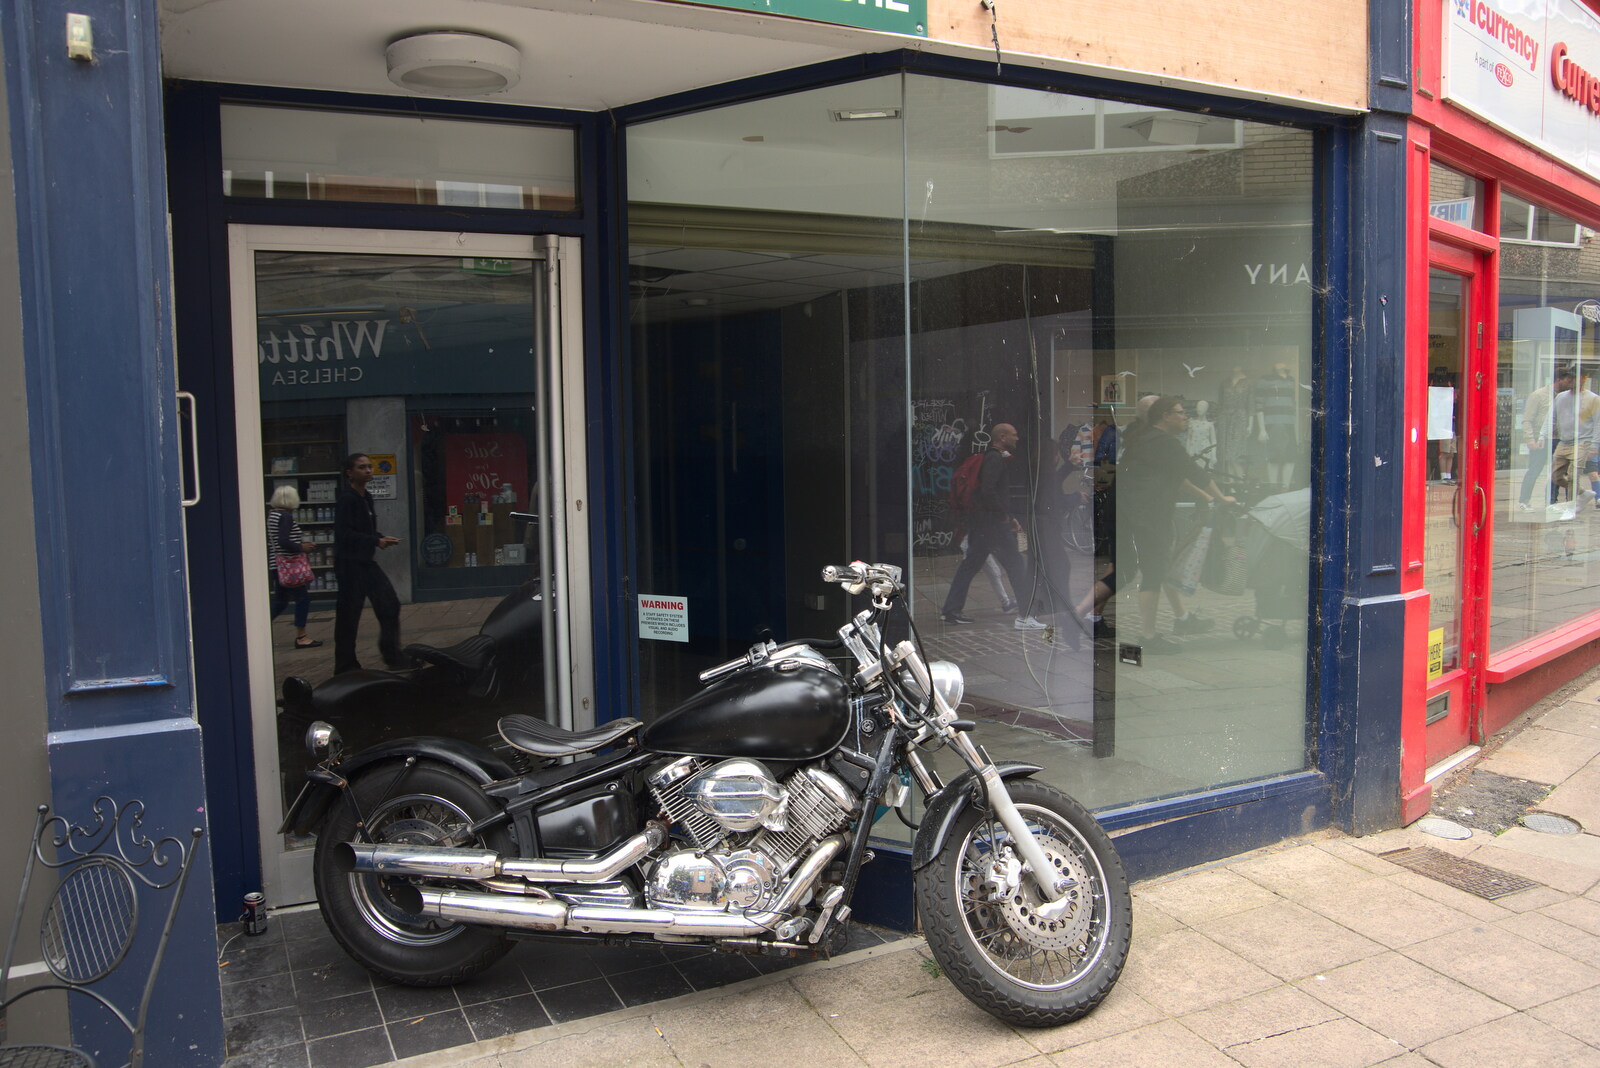 There's a motorbike outside an empty shop from Dippy and the City Dinosaur Trail, Norwich, Norfolk - 19th August 2021